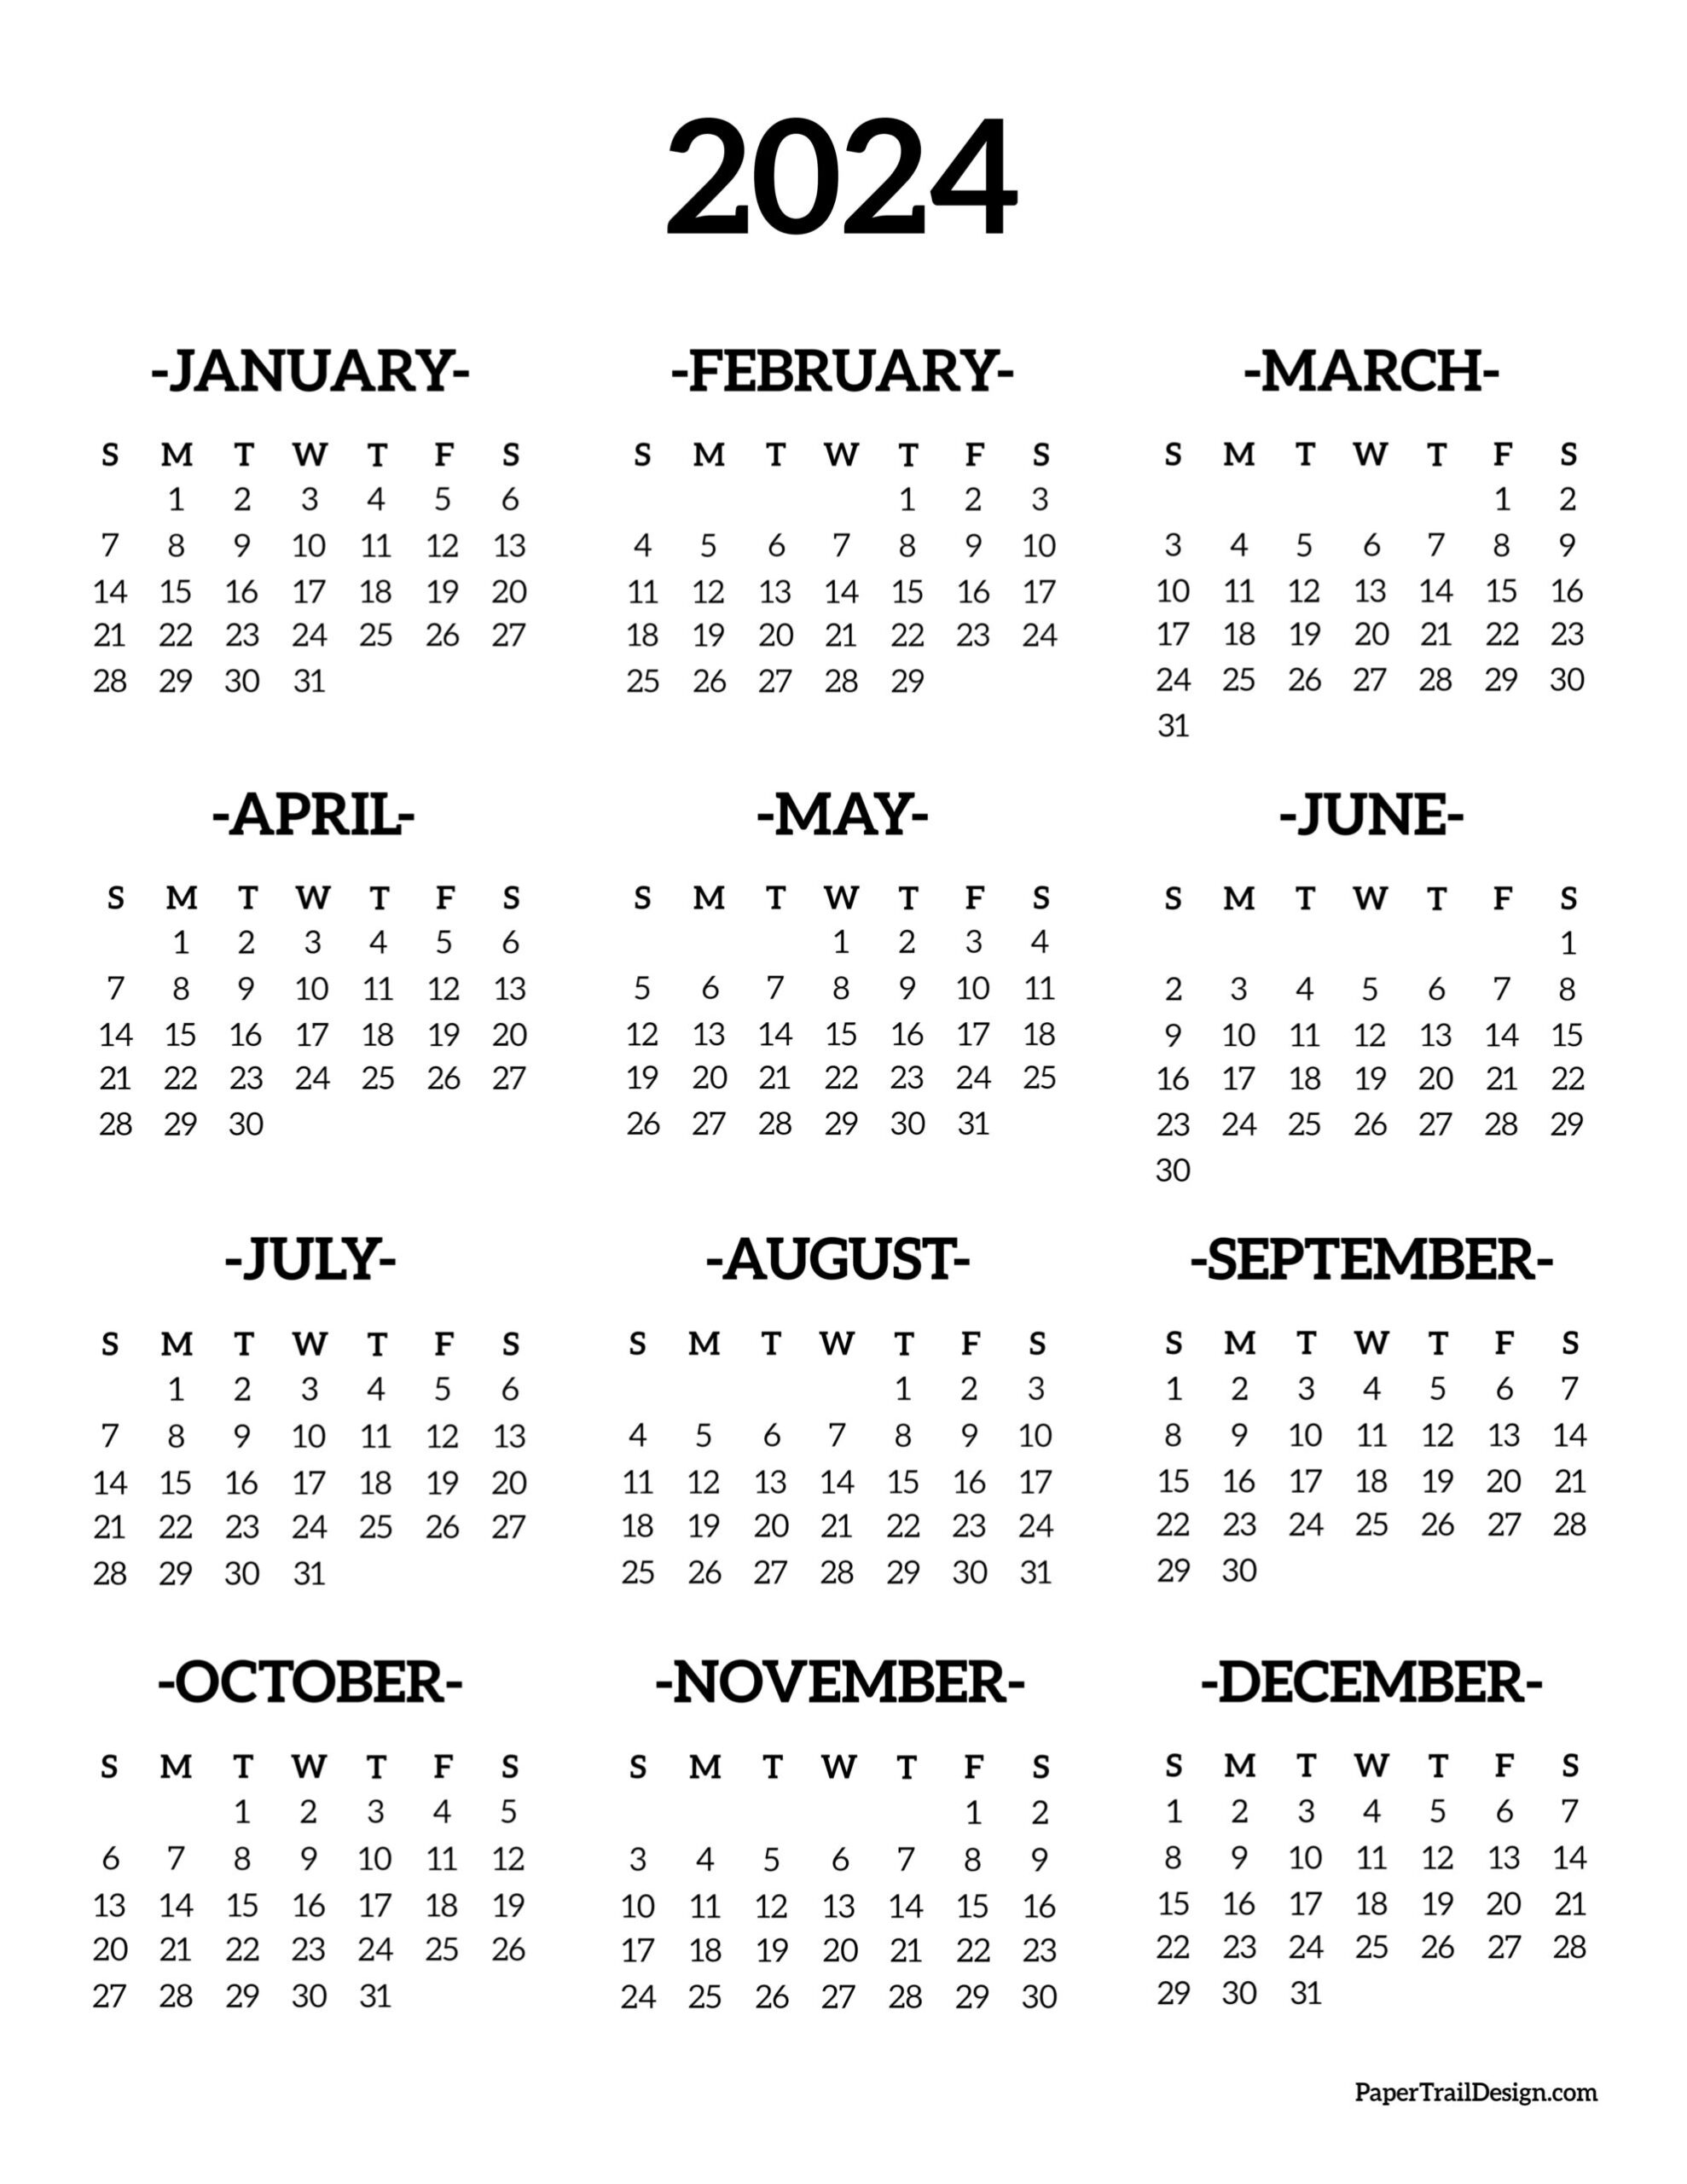 Calendar 2024 Printable One Page - Paper Trail Design | Free 2024 Yearly Calendar Printable One Page